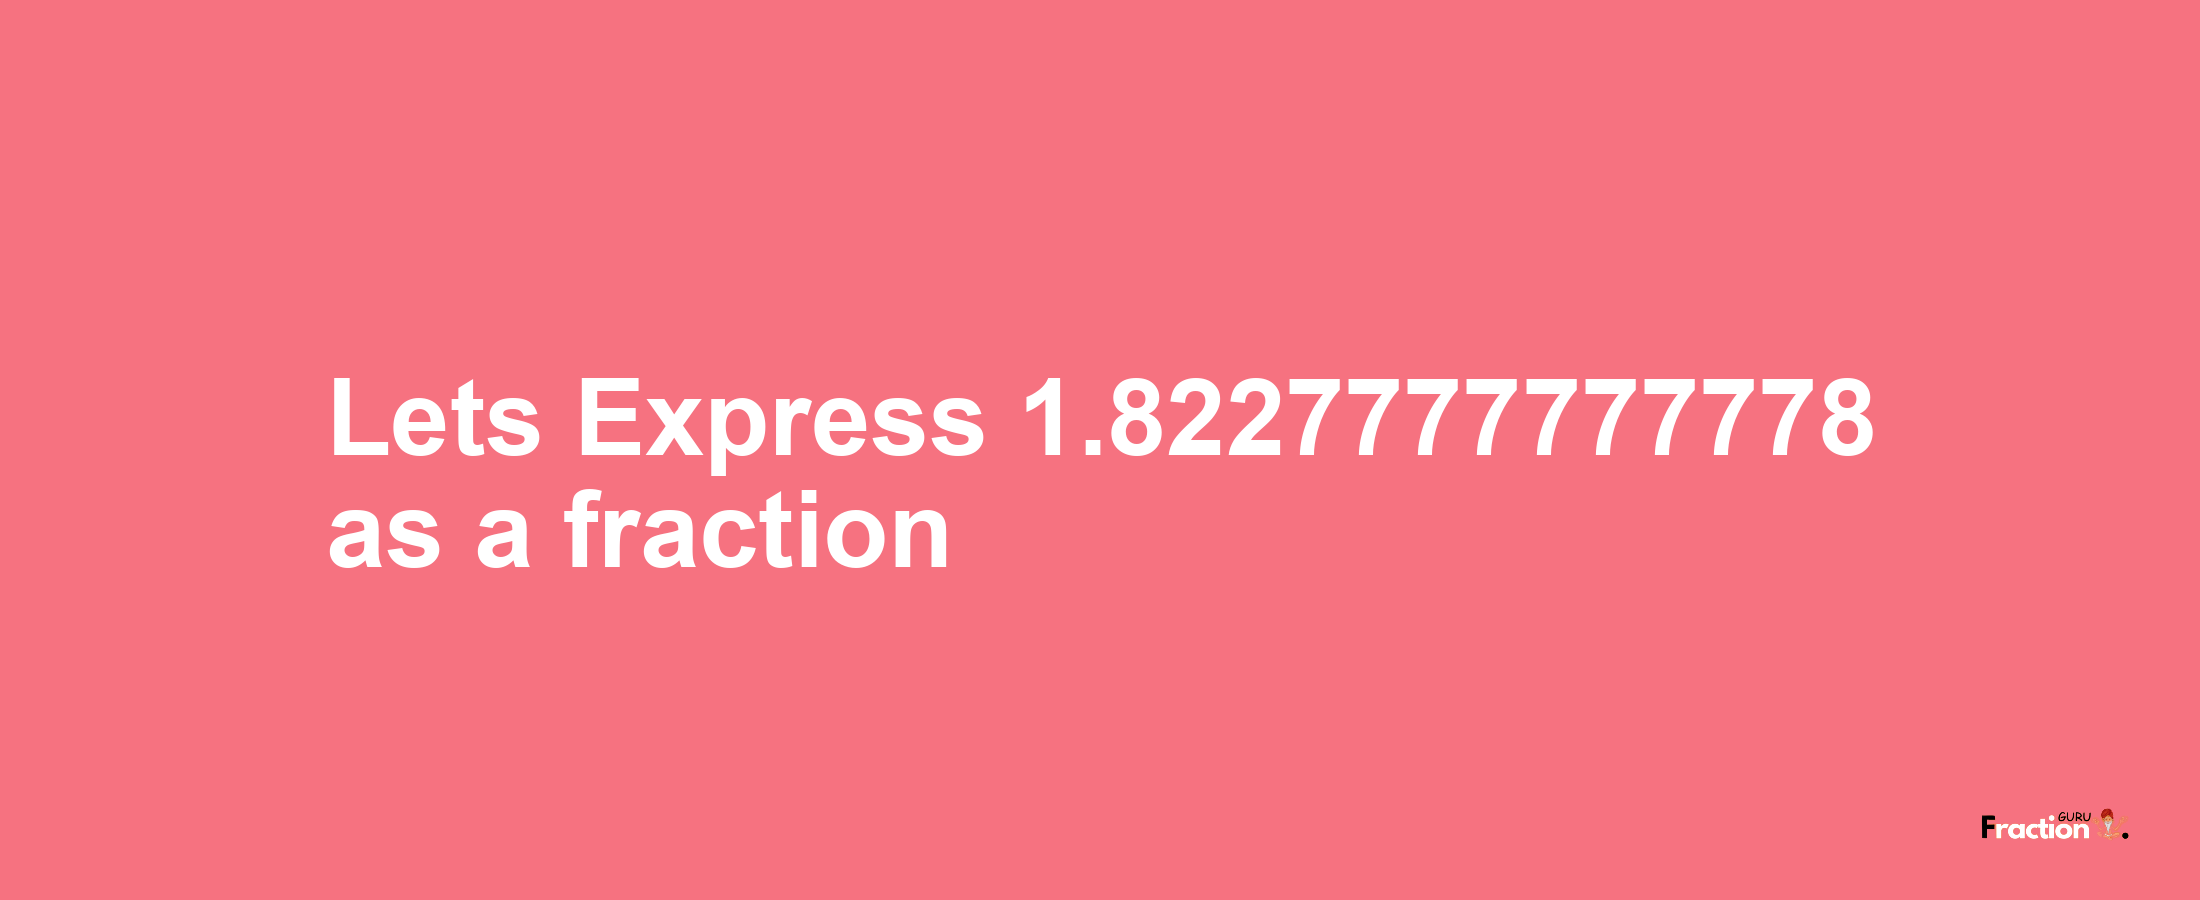 Lets Express 1.8227777777778 as afraction